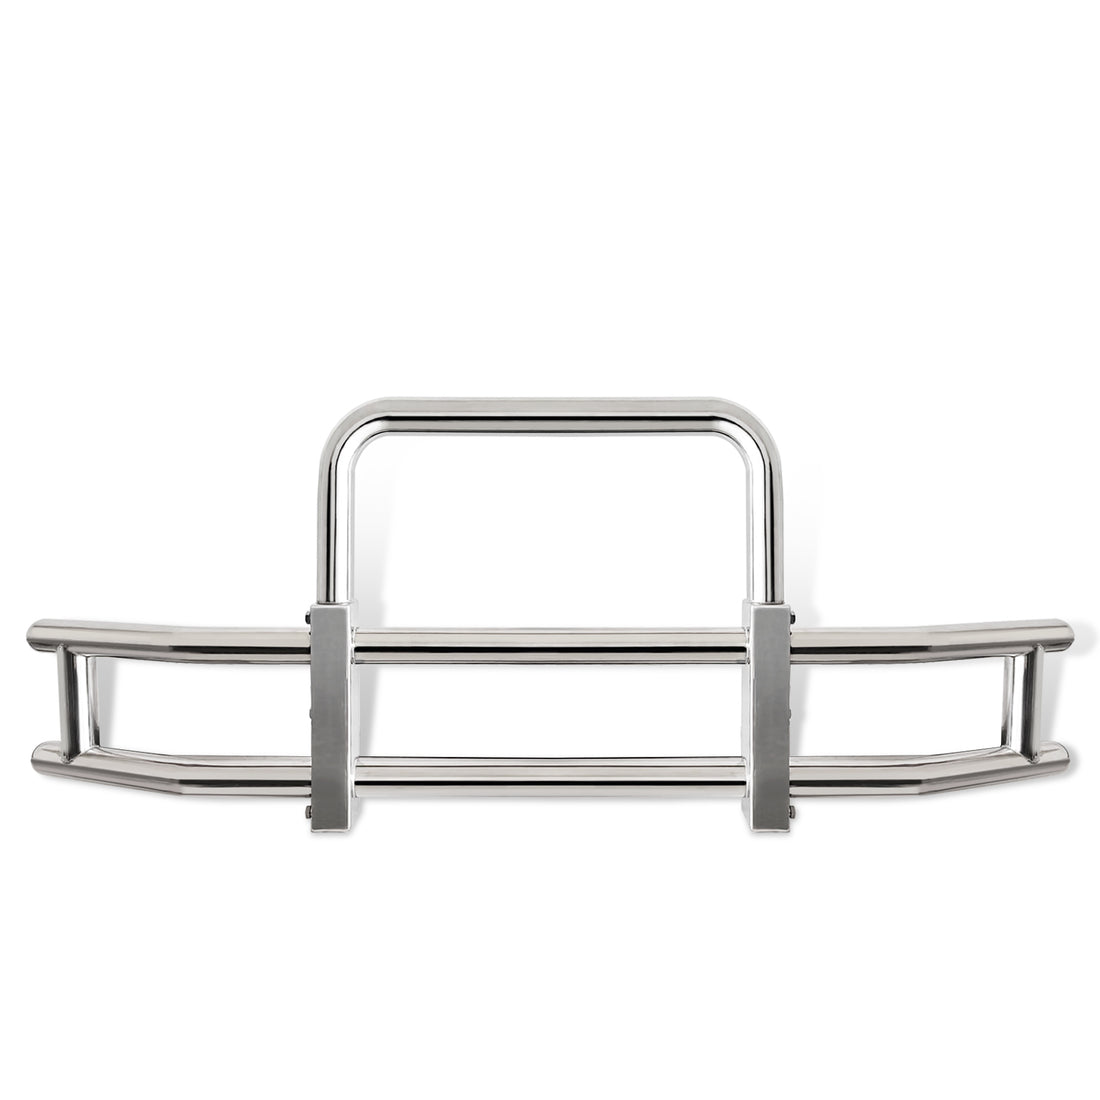 Deer Guard for Volvo VN VNL 2004 2017 with brackets chrome-stainless steel